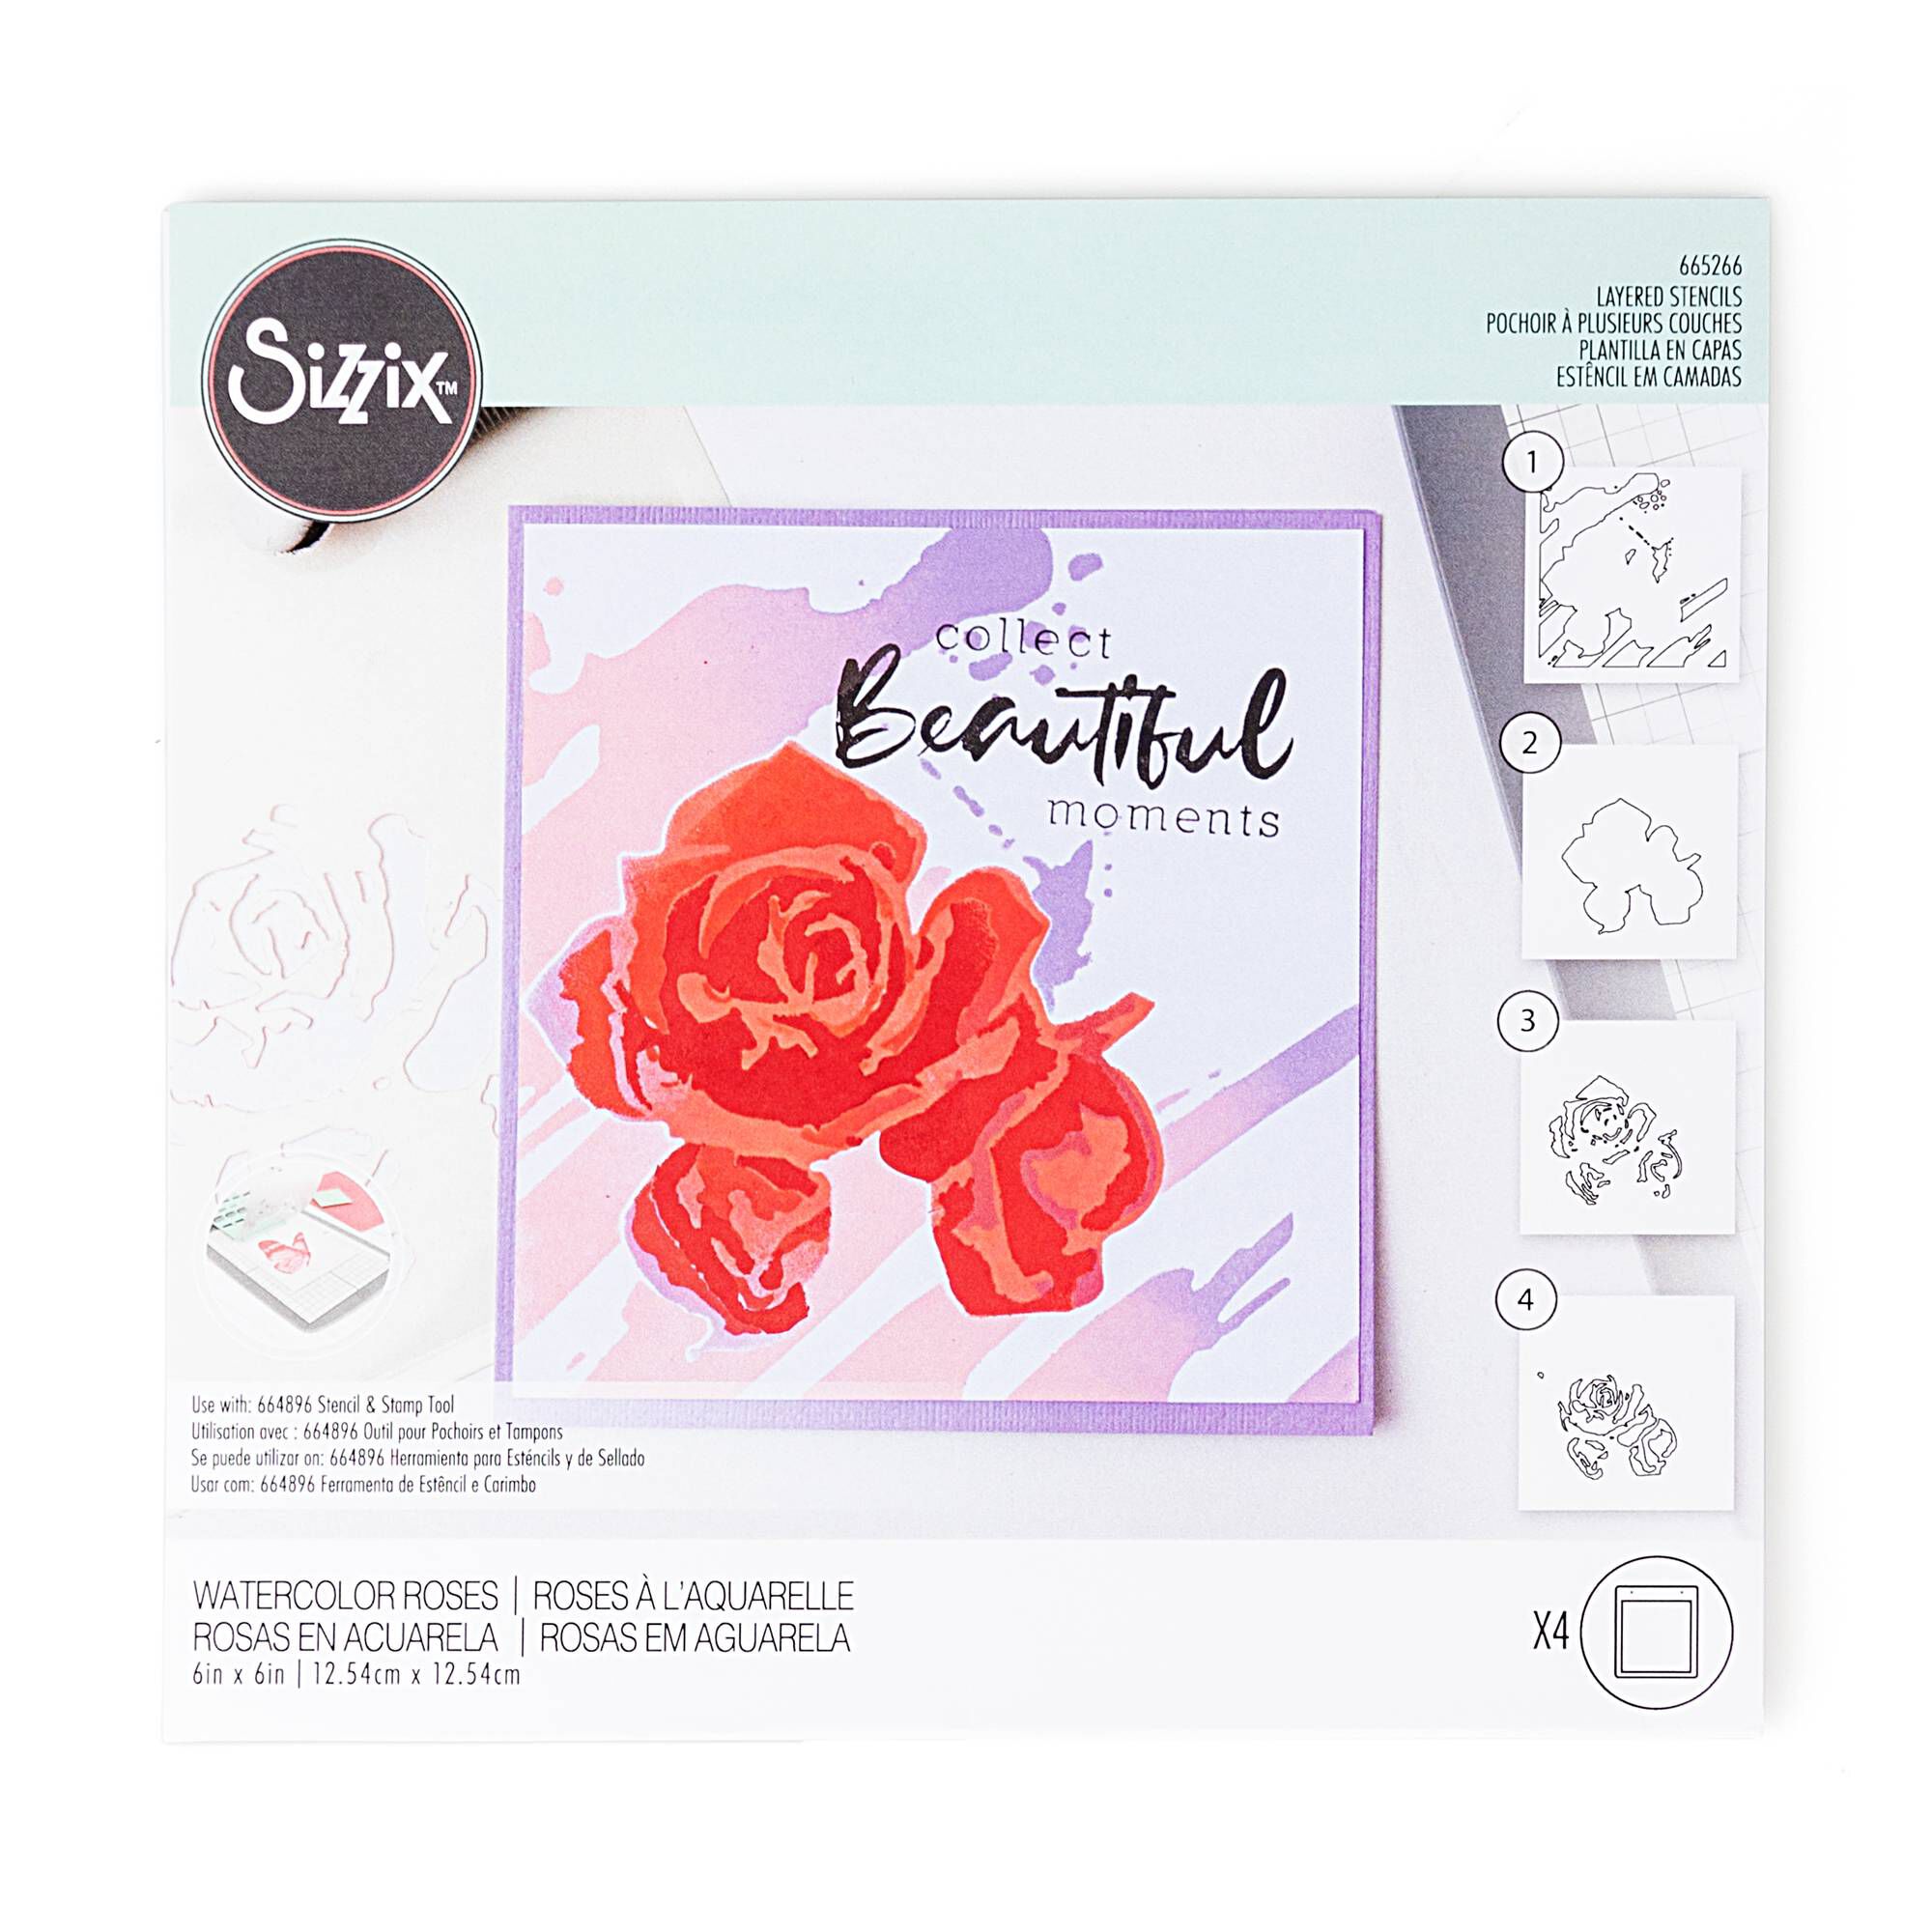 Sizzix Watercolour Roses Layered Stencil Set 4 Pack